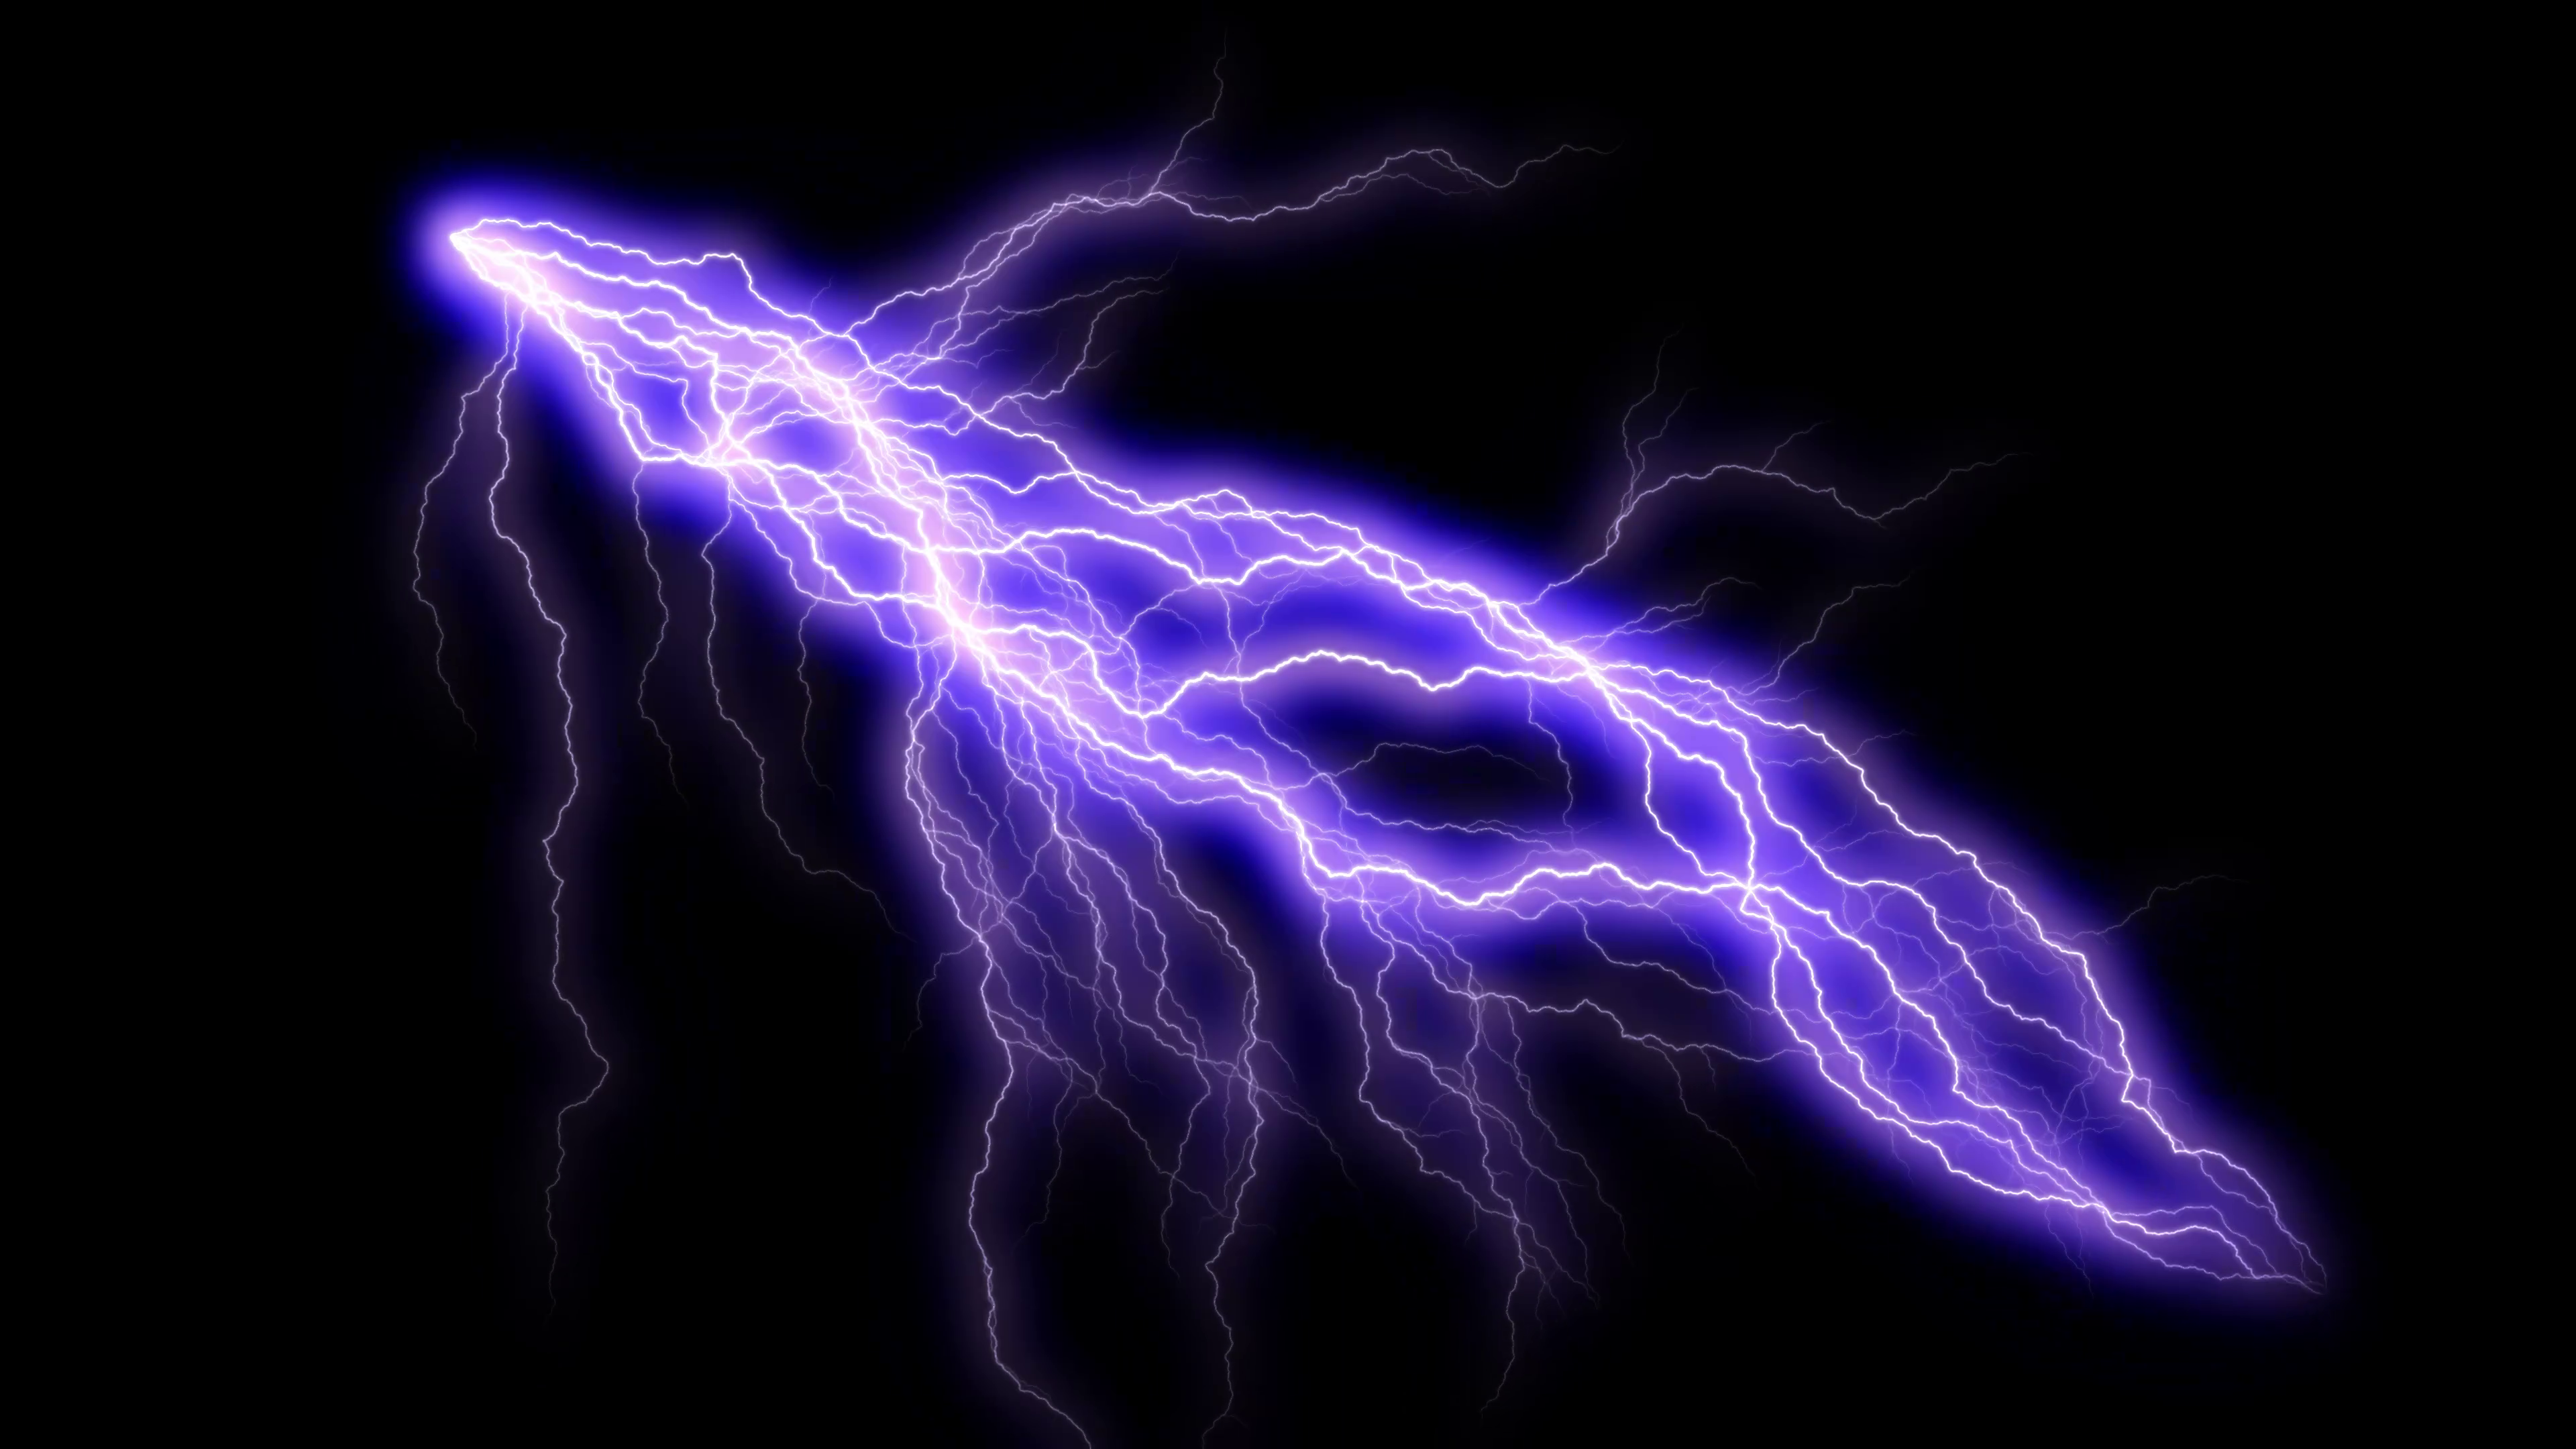 4K Purple Lightning Overlay Effect Free Download || Overlay Effect For Editing